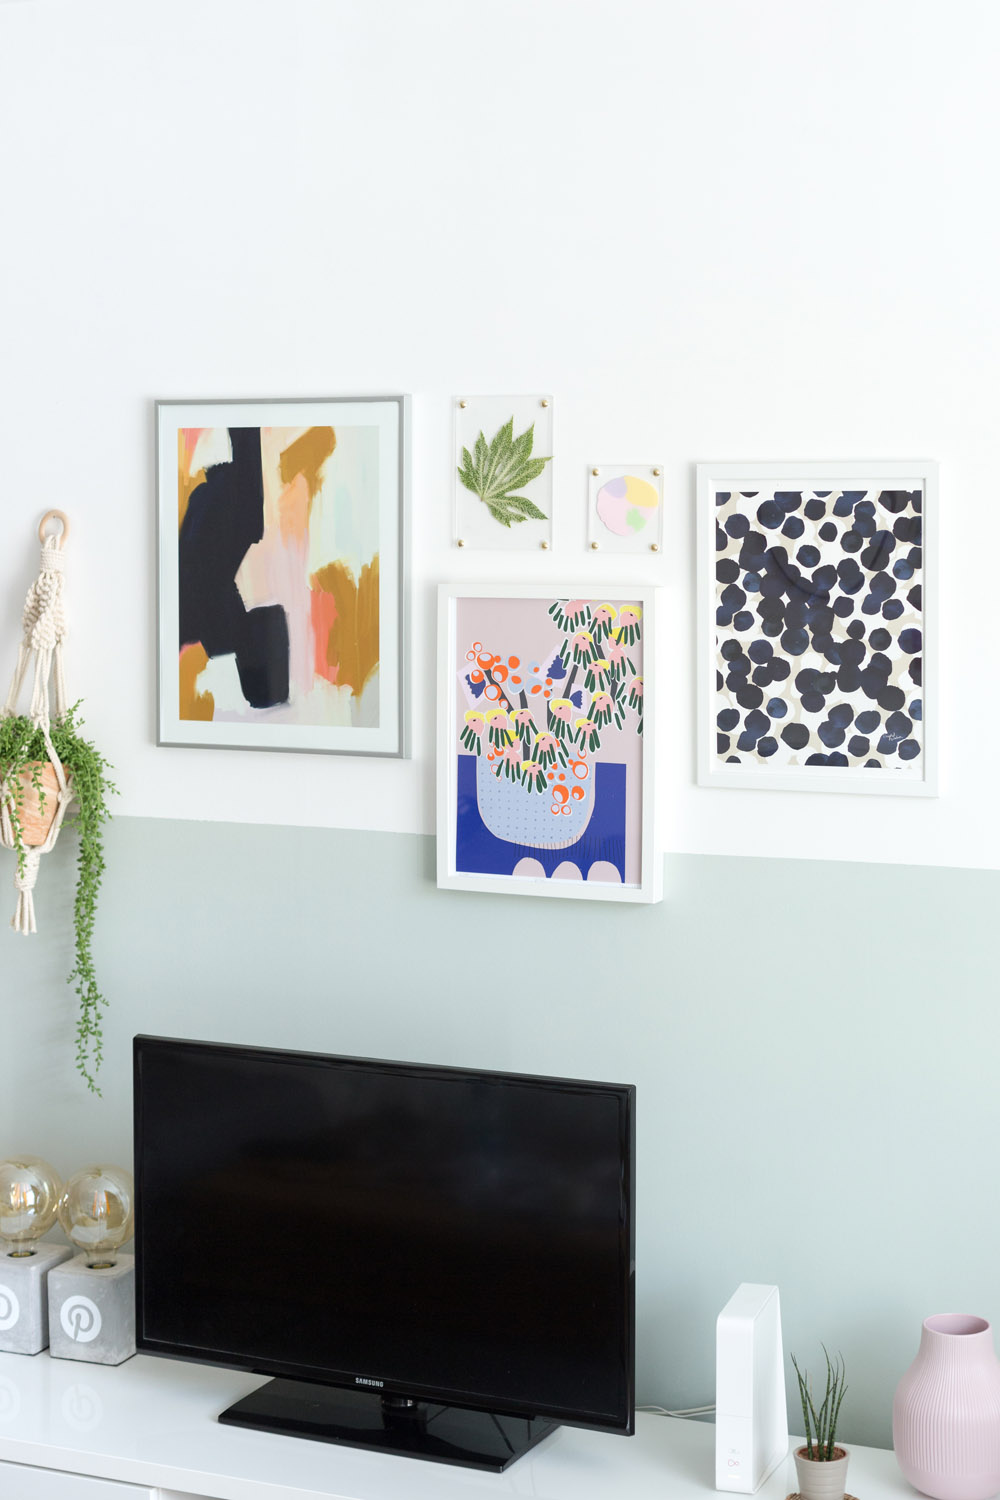 DIY No Drilling Perspex Picture Frames Made Easy with Sugru | @fallfordiy